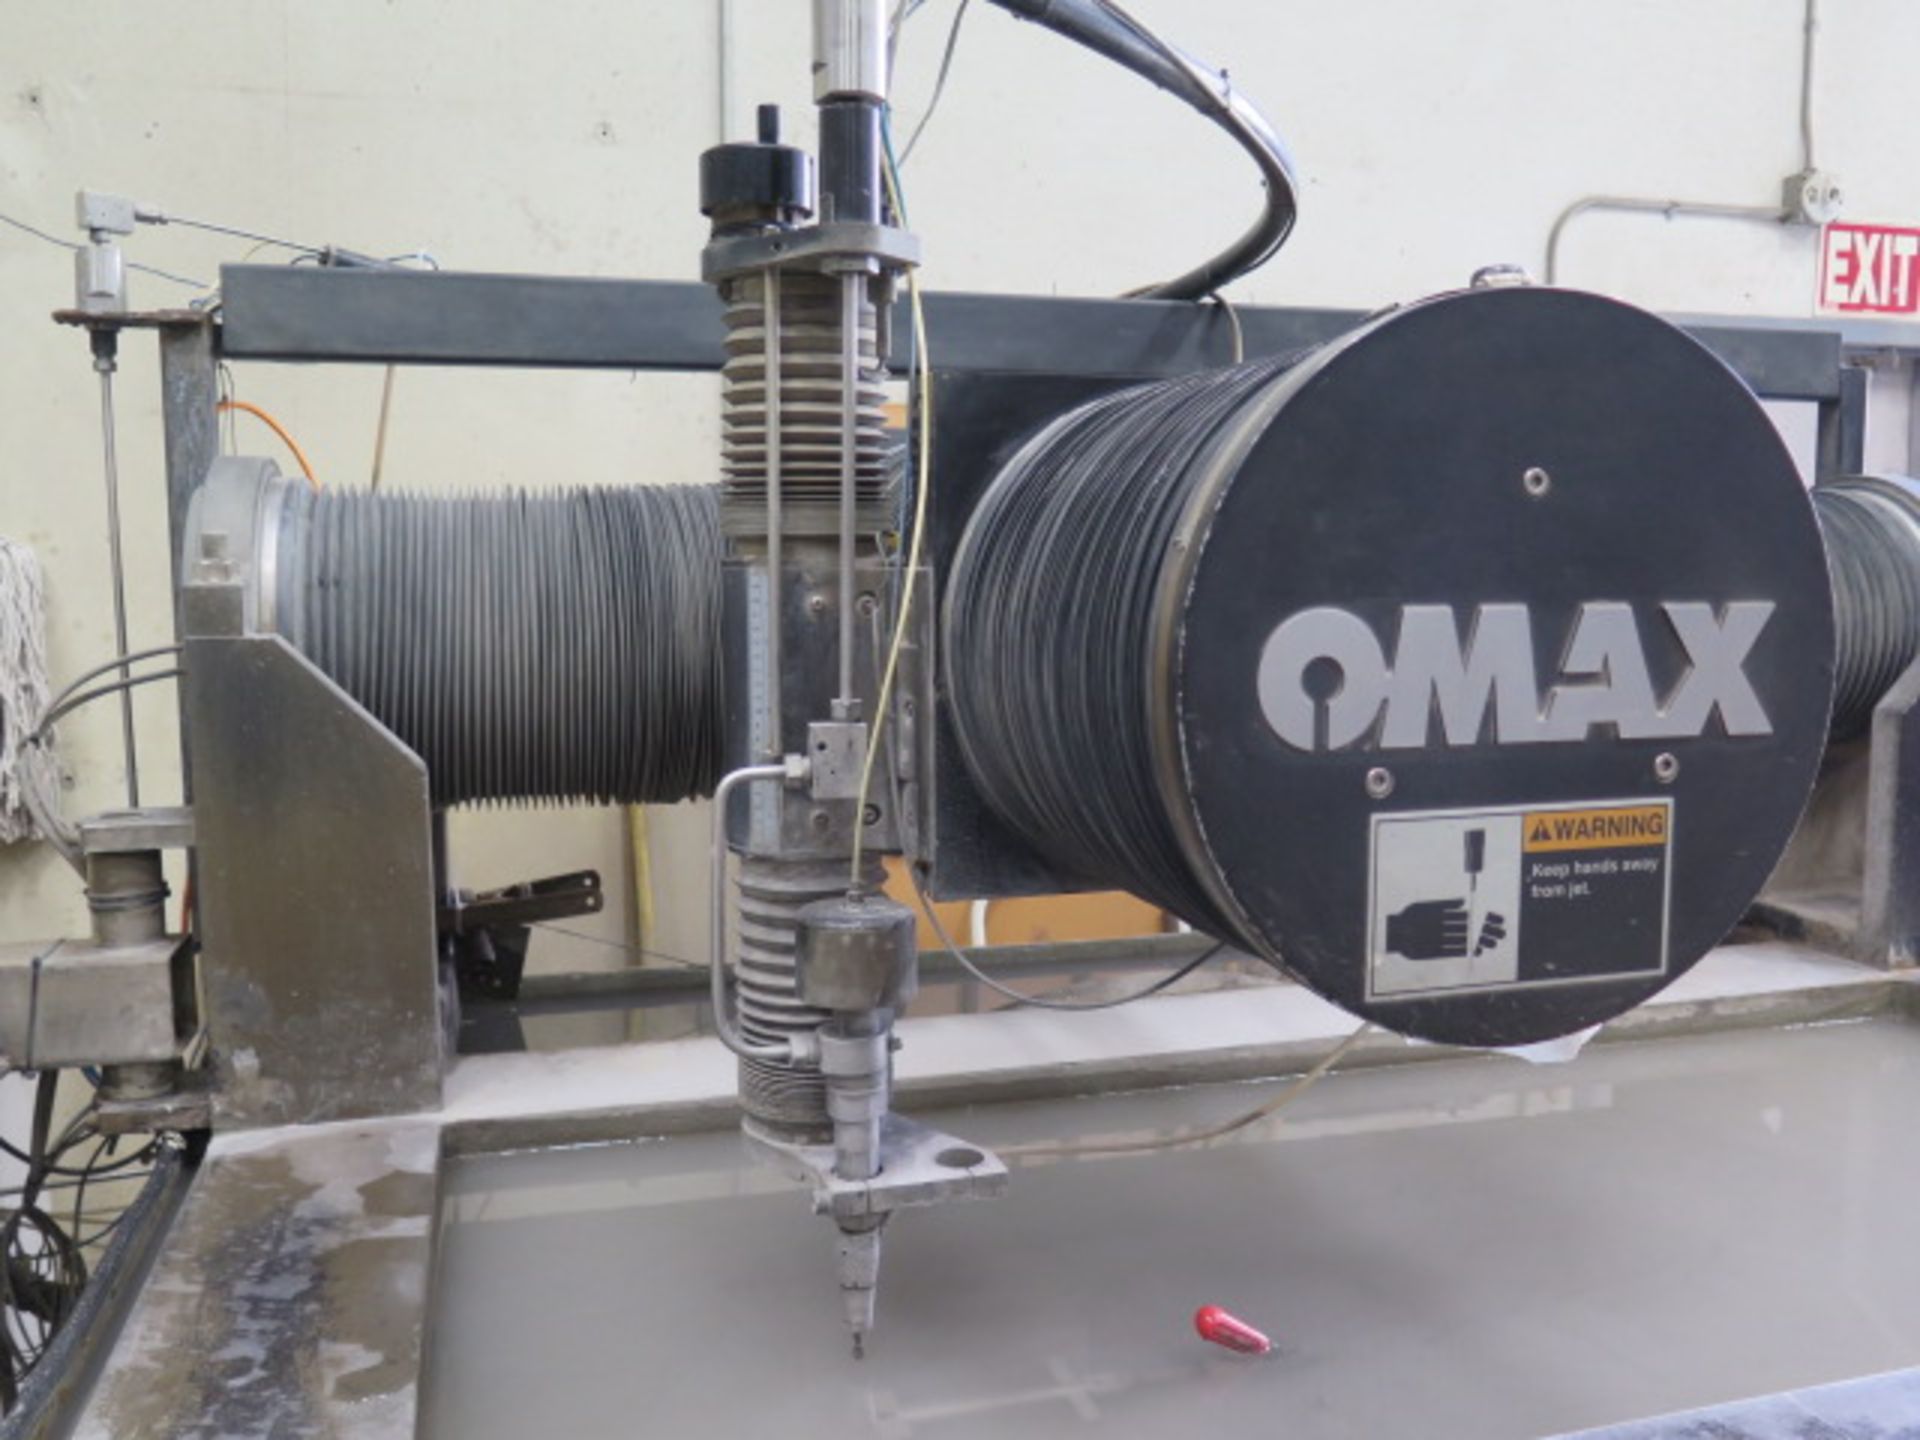 Omax mdl. 2652 2’ x 4’ CNC WaterJet Machine s/n B511824 w/ Omax MAKE Precision Velocity, SOLD AS IS - Image 4 of 17